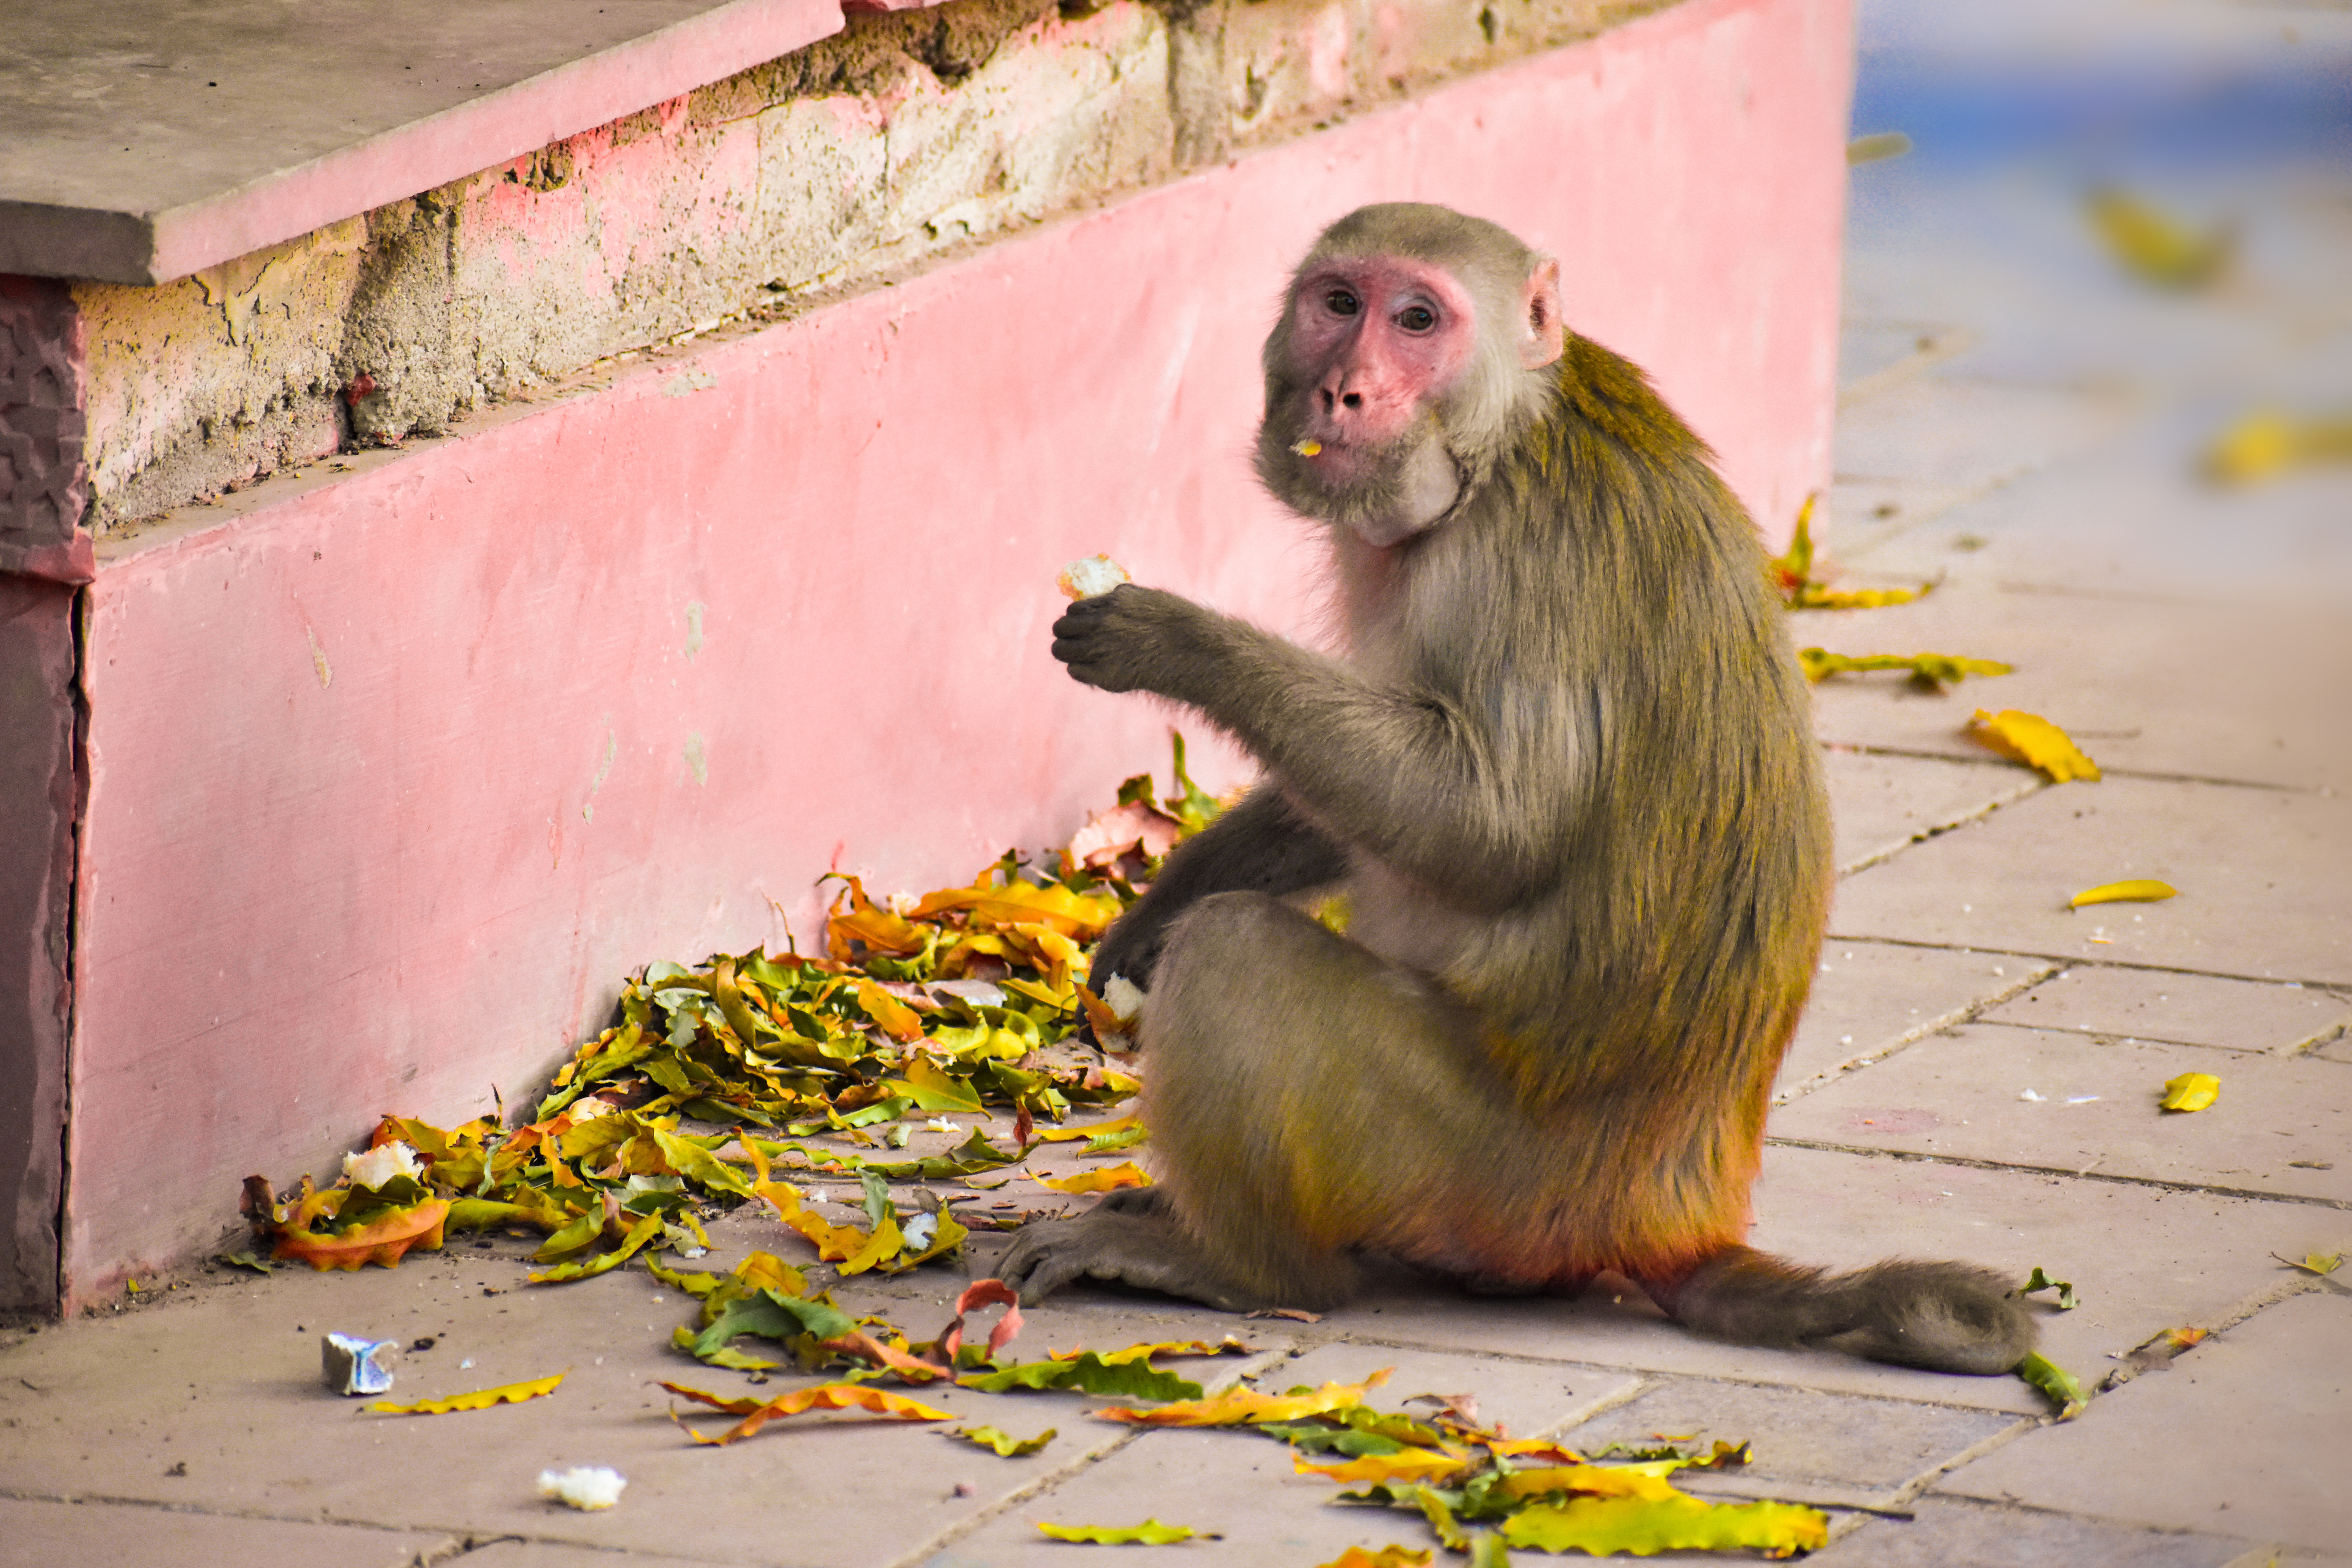 Monkey Eating Leaves sitting near the wall royalty free stock image